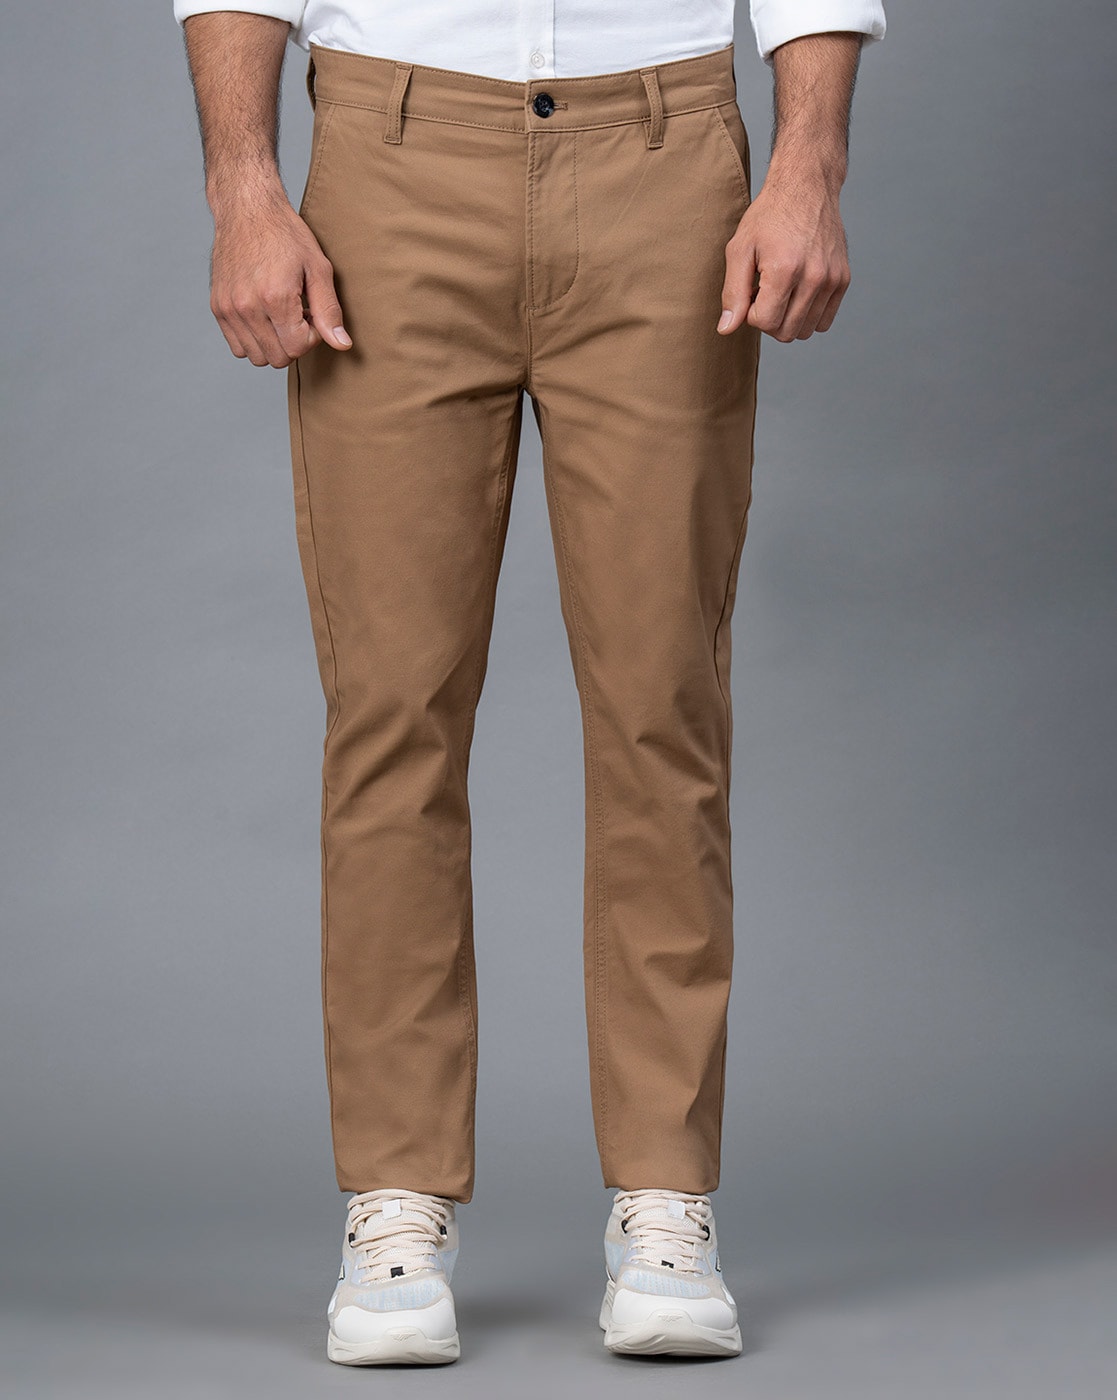 Shop the 10 best chino pants for men: J. Crew, Polo, Gap, more